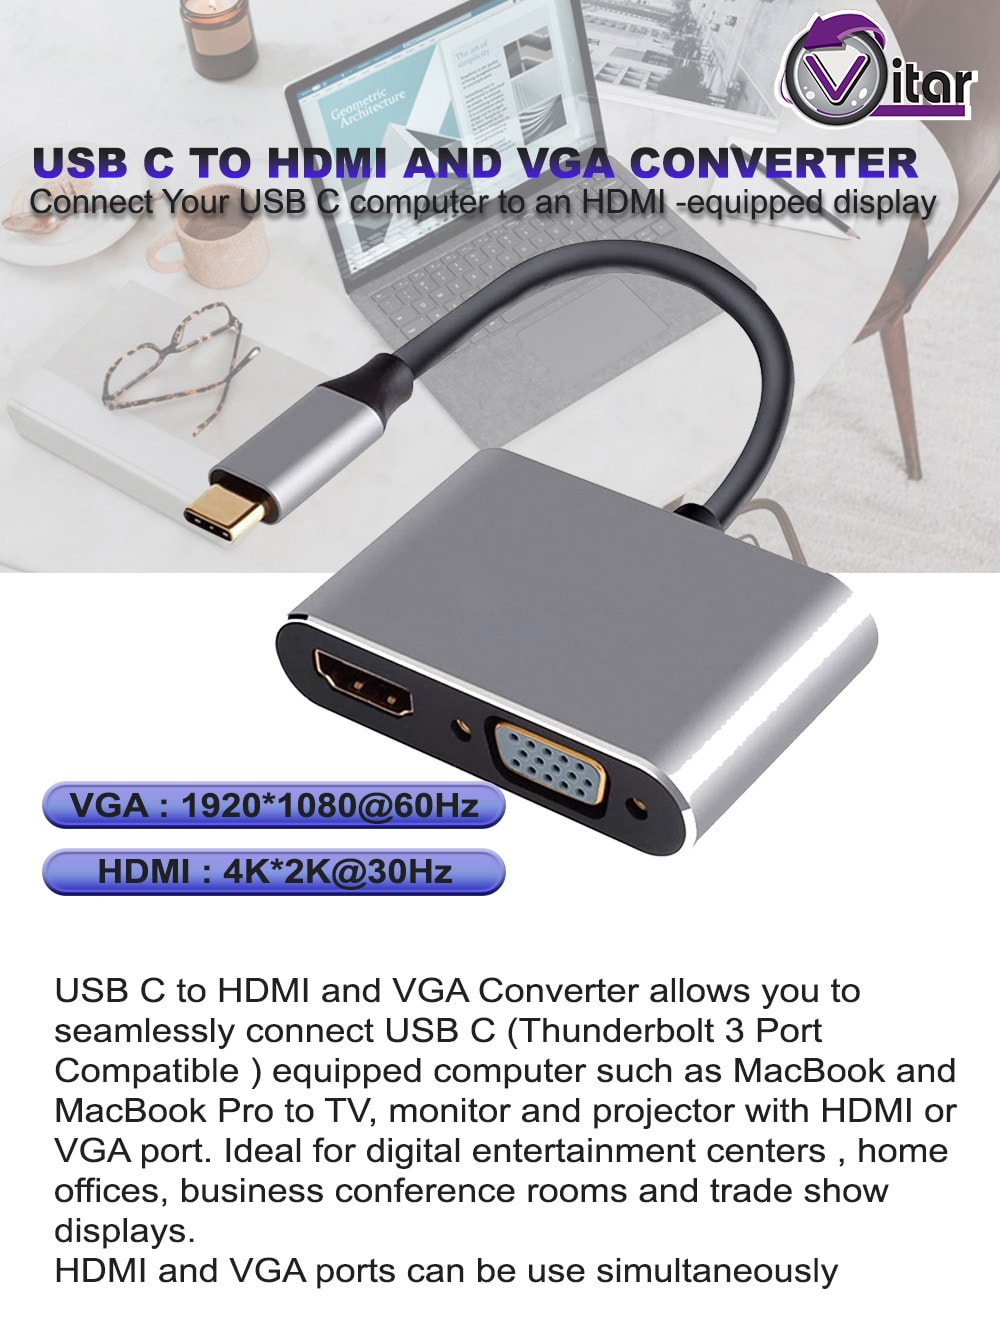 Vitar USBCM Series Type C to HDMI Multiport Adapters